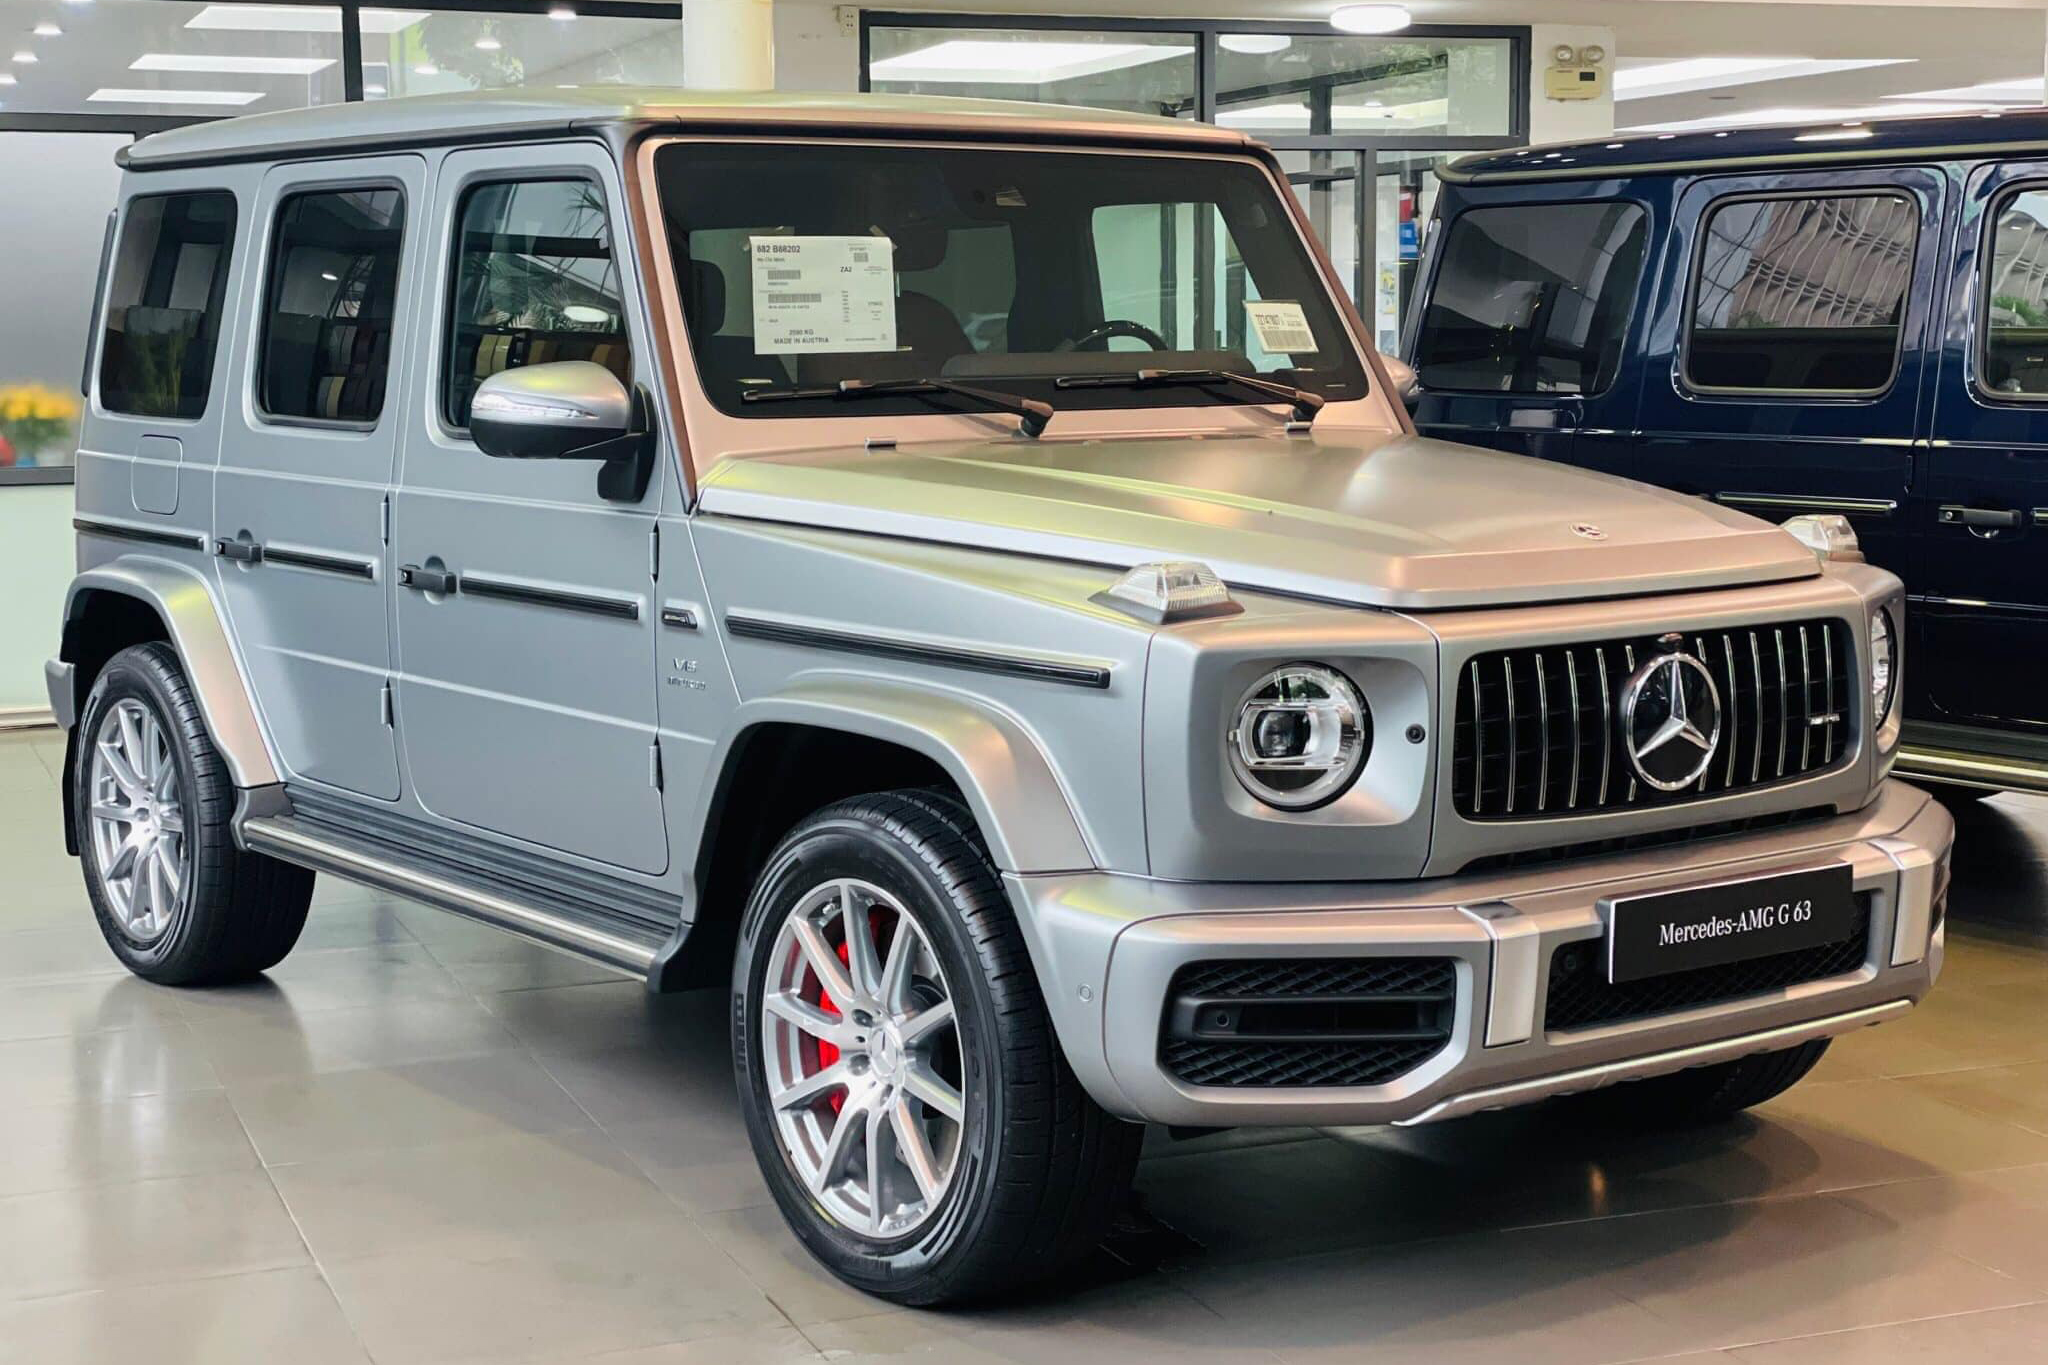 mercedes-amg-g-63-phan-phoi-chinh-hang-cafeautovn-1